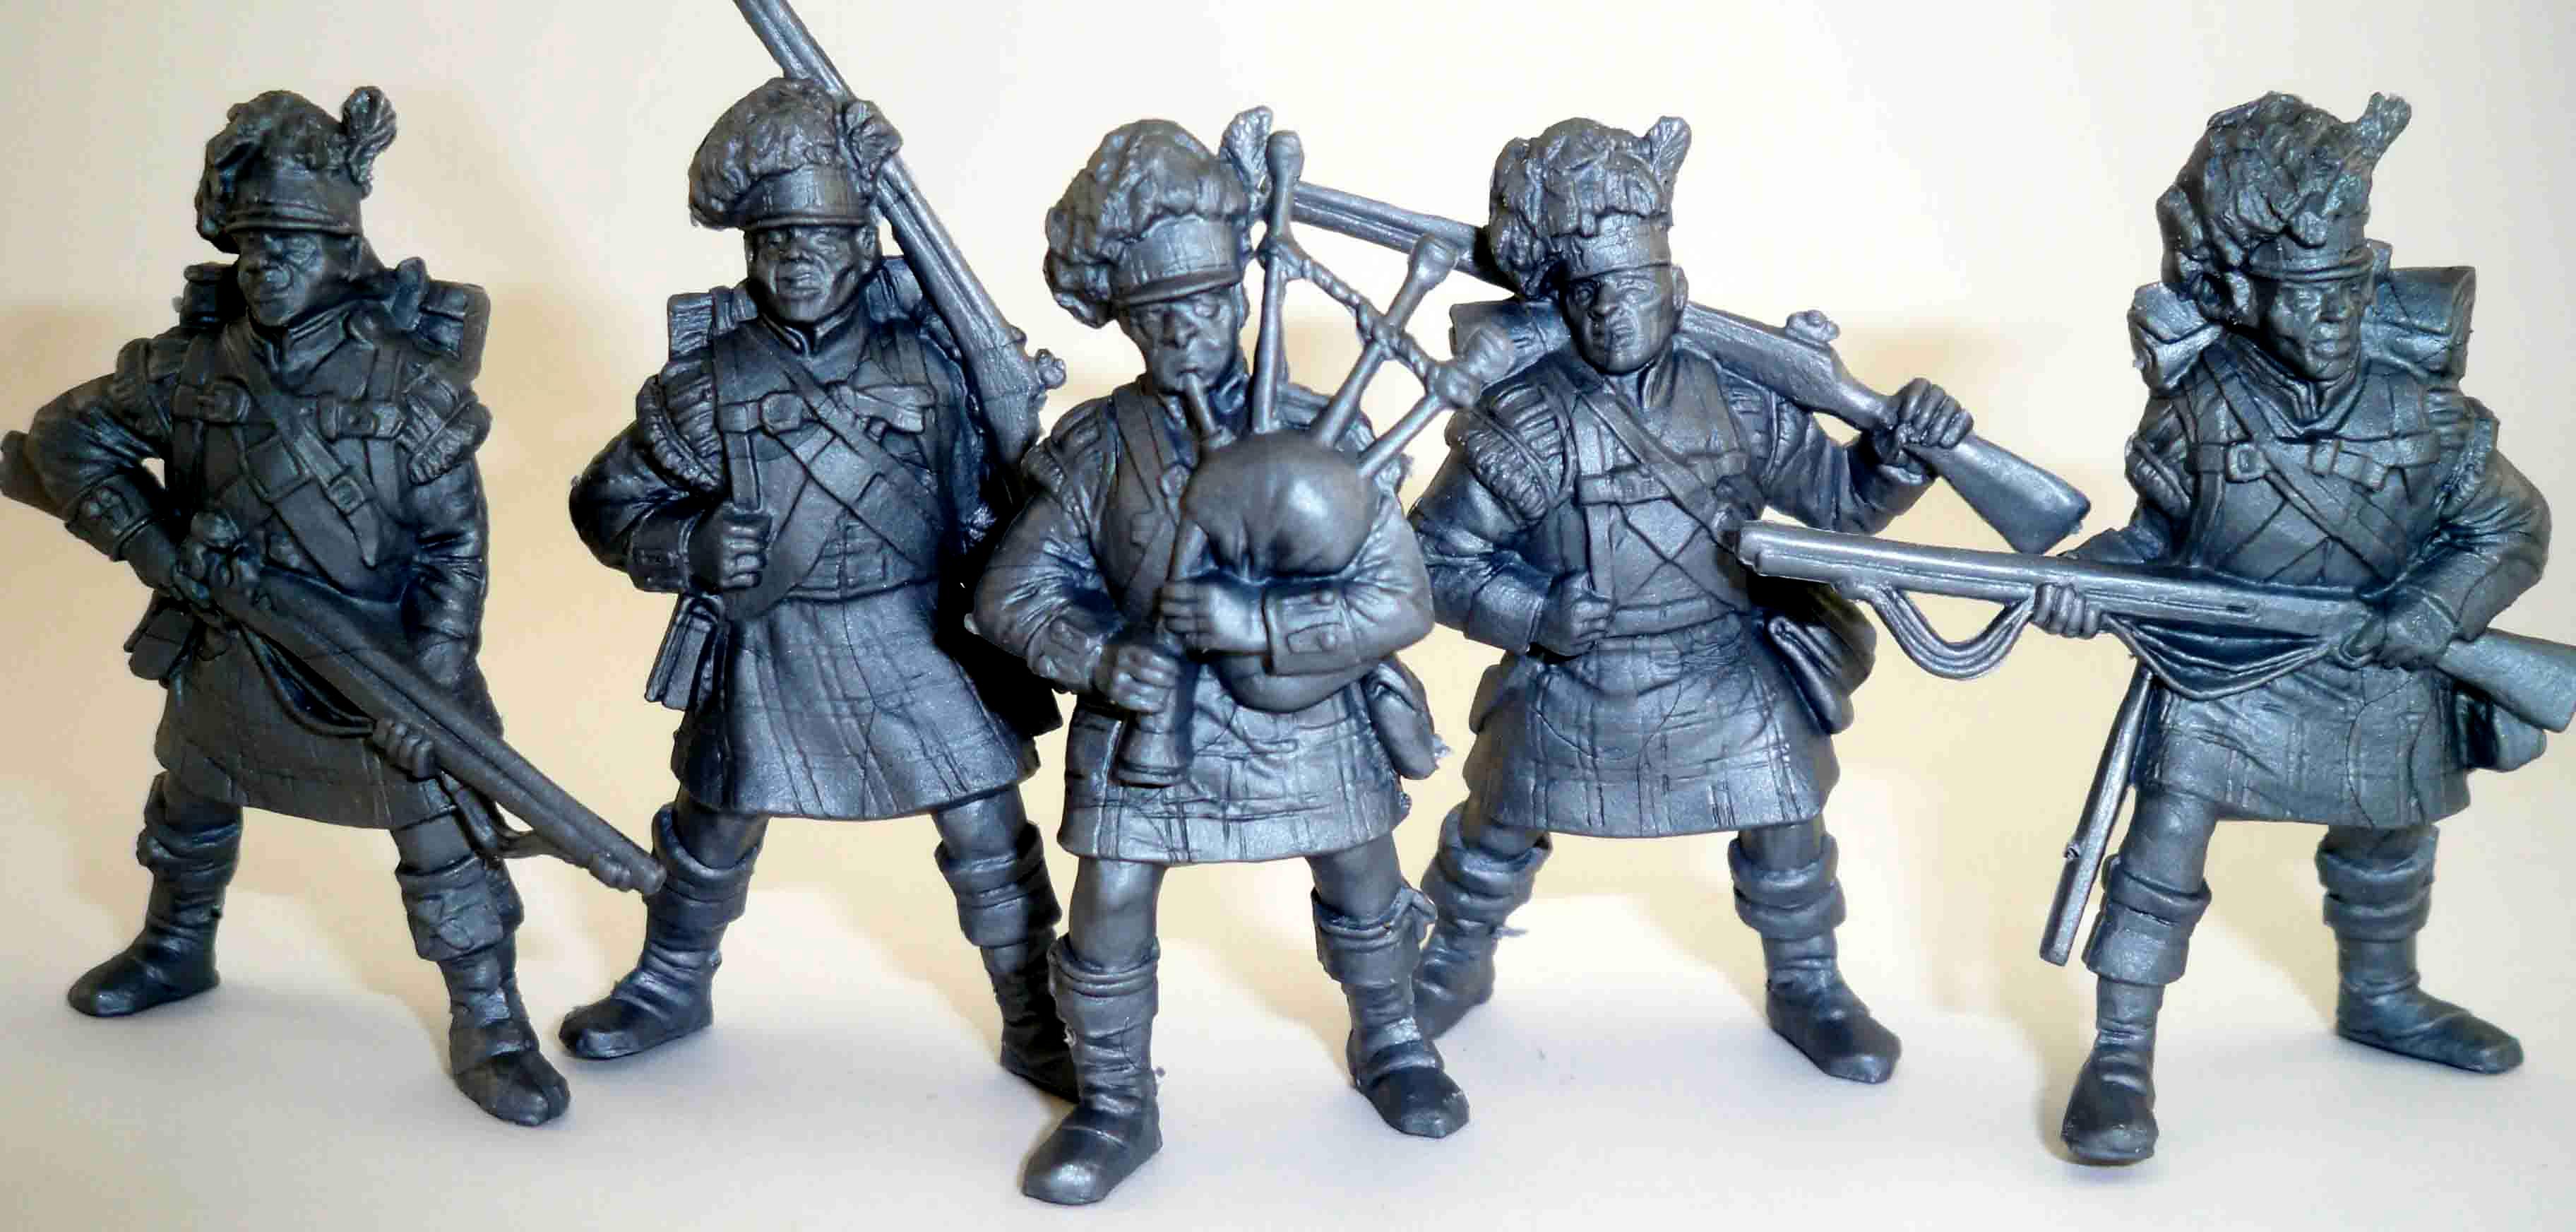 54mm Soldiers, Figures 1/32, Model Soldier, Plastic Toy Soldiers 54mm, Toy Soldiers, War Games, Wargame Miniatures